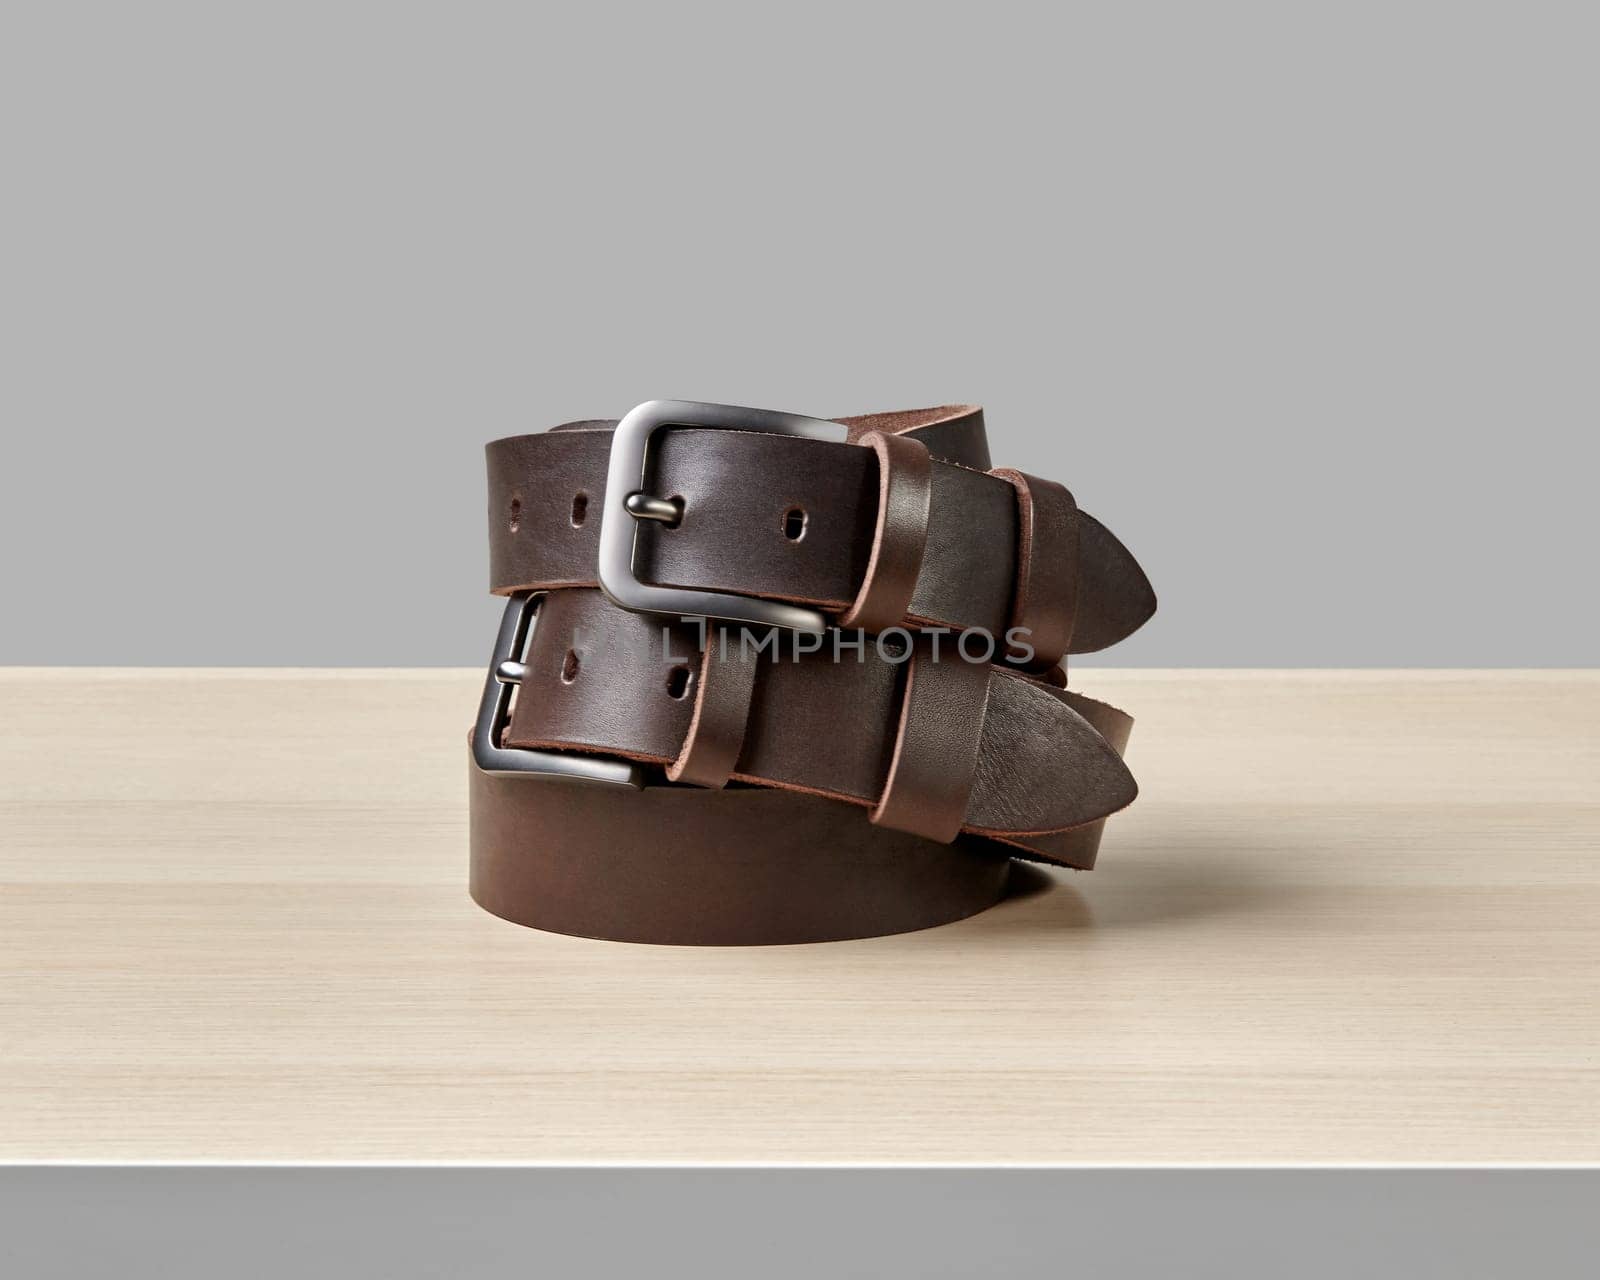 Two custom dark brown leather belts with DAD embossed by nazarovsergey